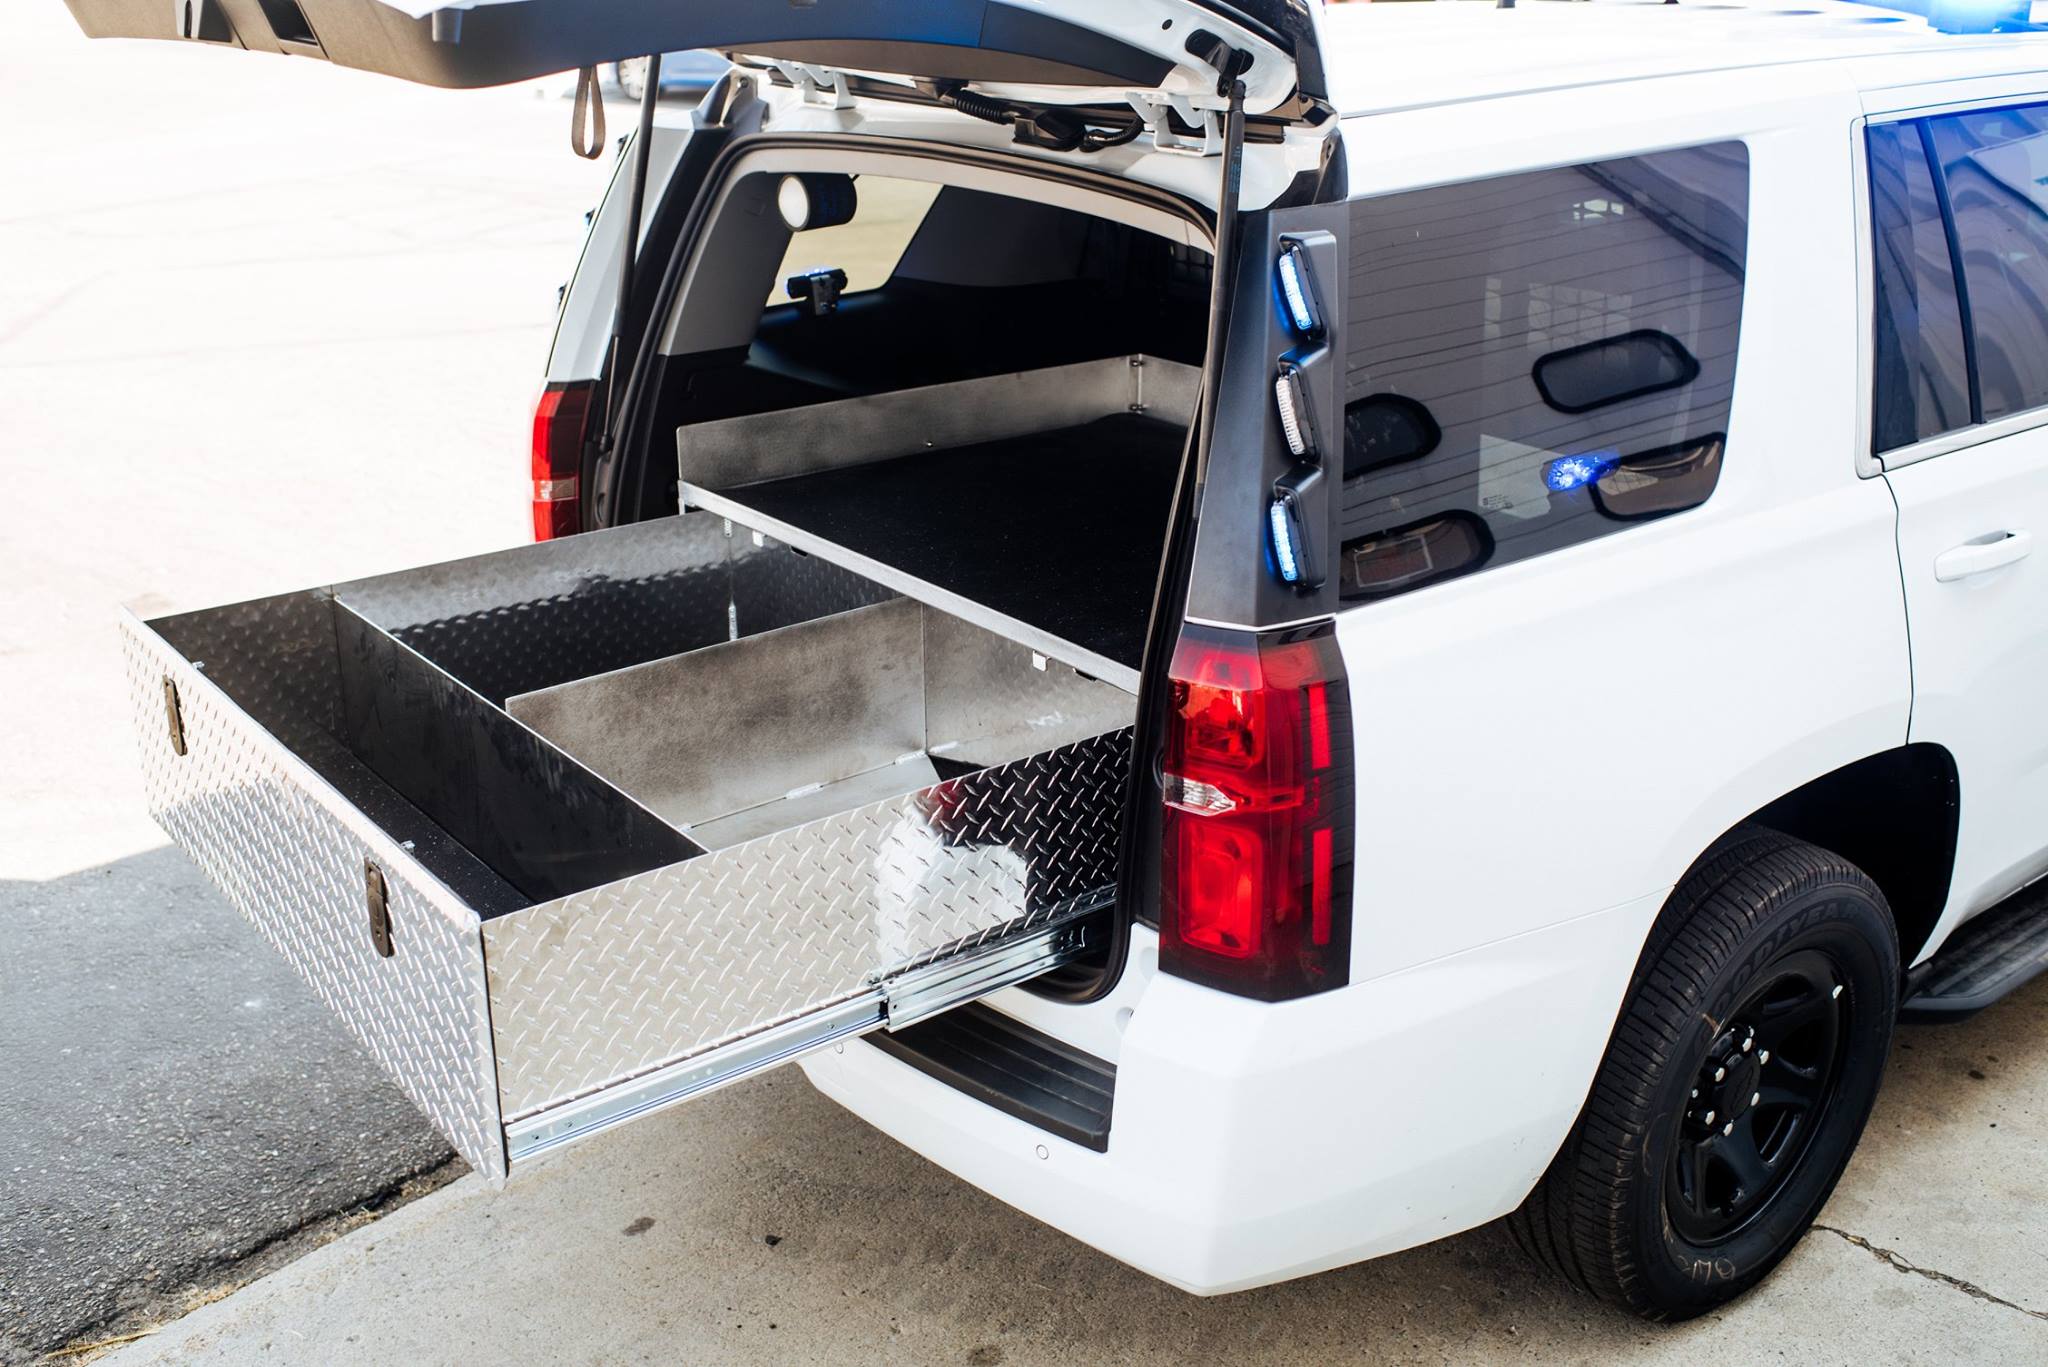 police suv storage system, extendobed, custom truck bed storage, full extension truck bed slides, heavy duty truck bed organizer